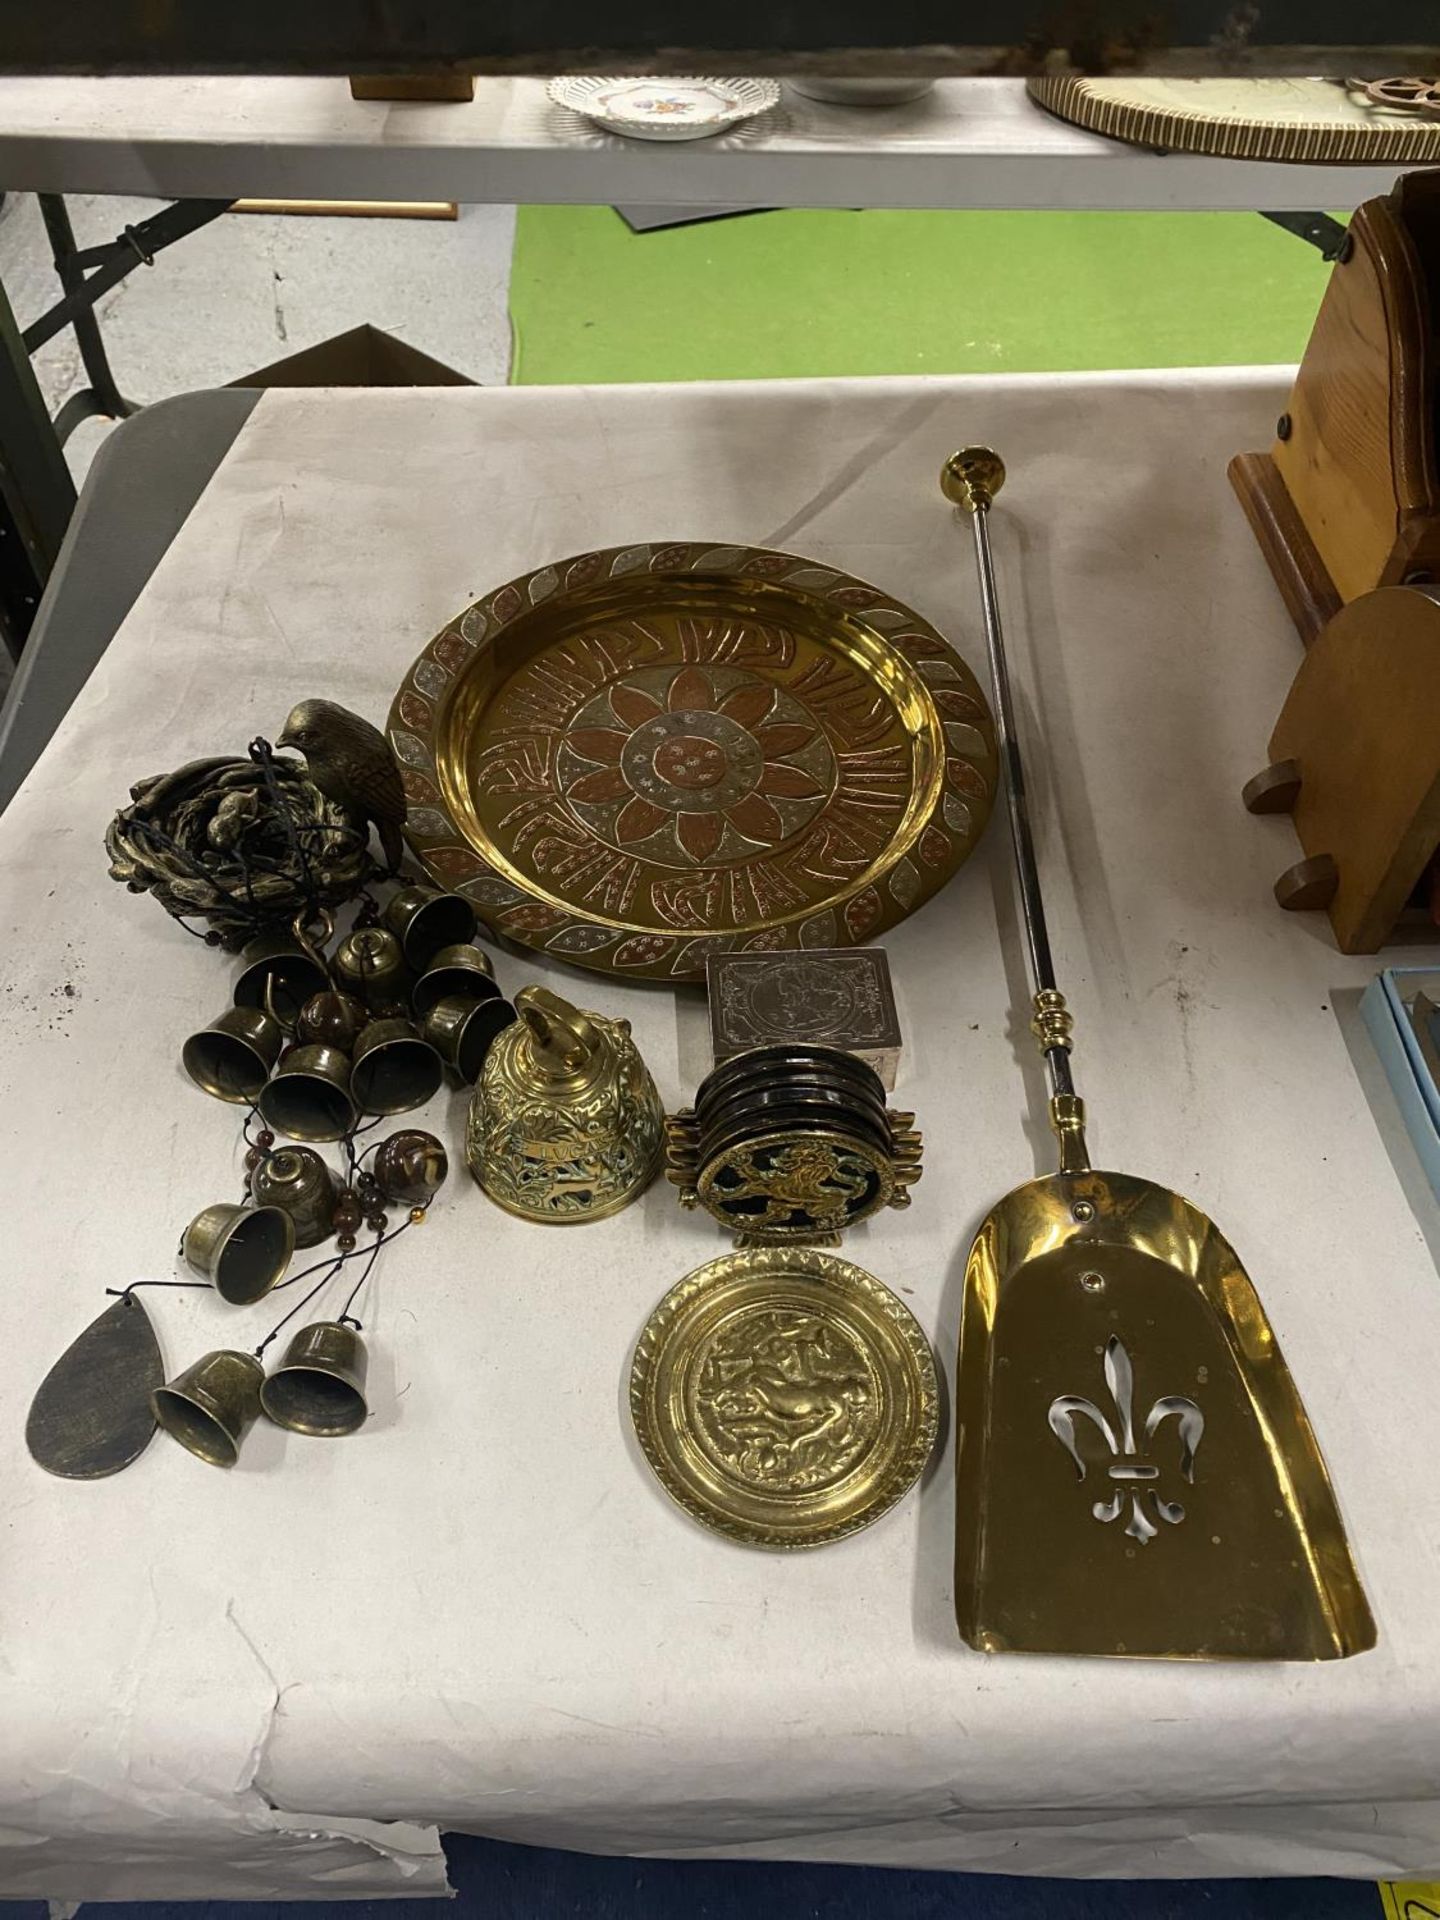 A QUANTITY OF BRASSWARE TO INCLUDE A 'BIRD' WINDCHIME, COASTERS WITH EMBOSSED LIONS, A BOX, PLATE,